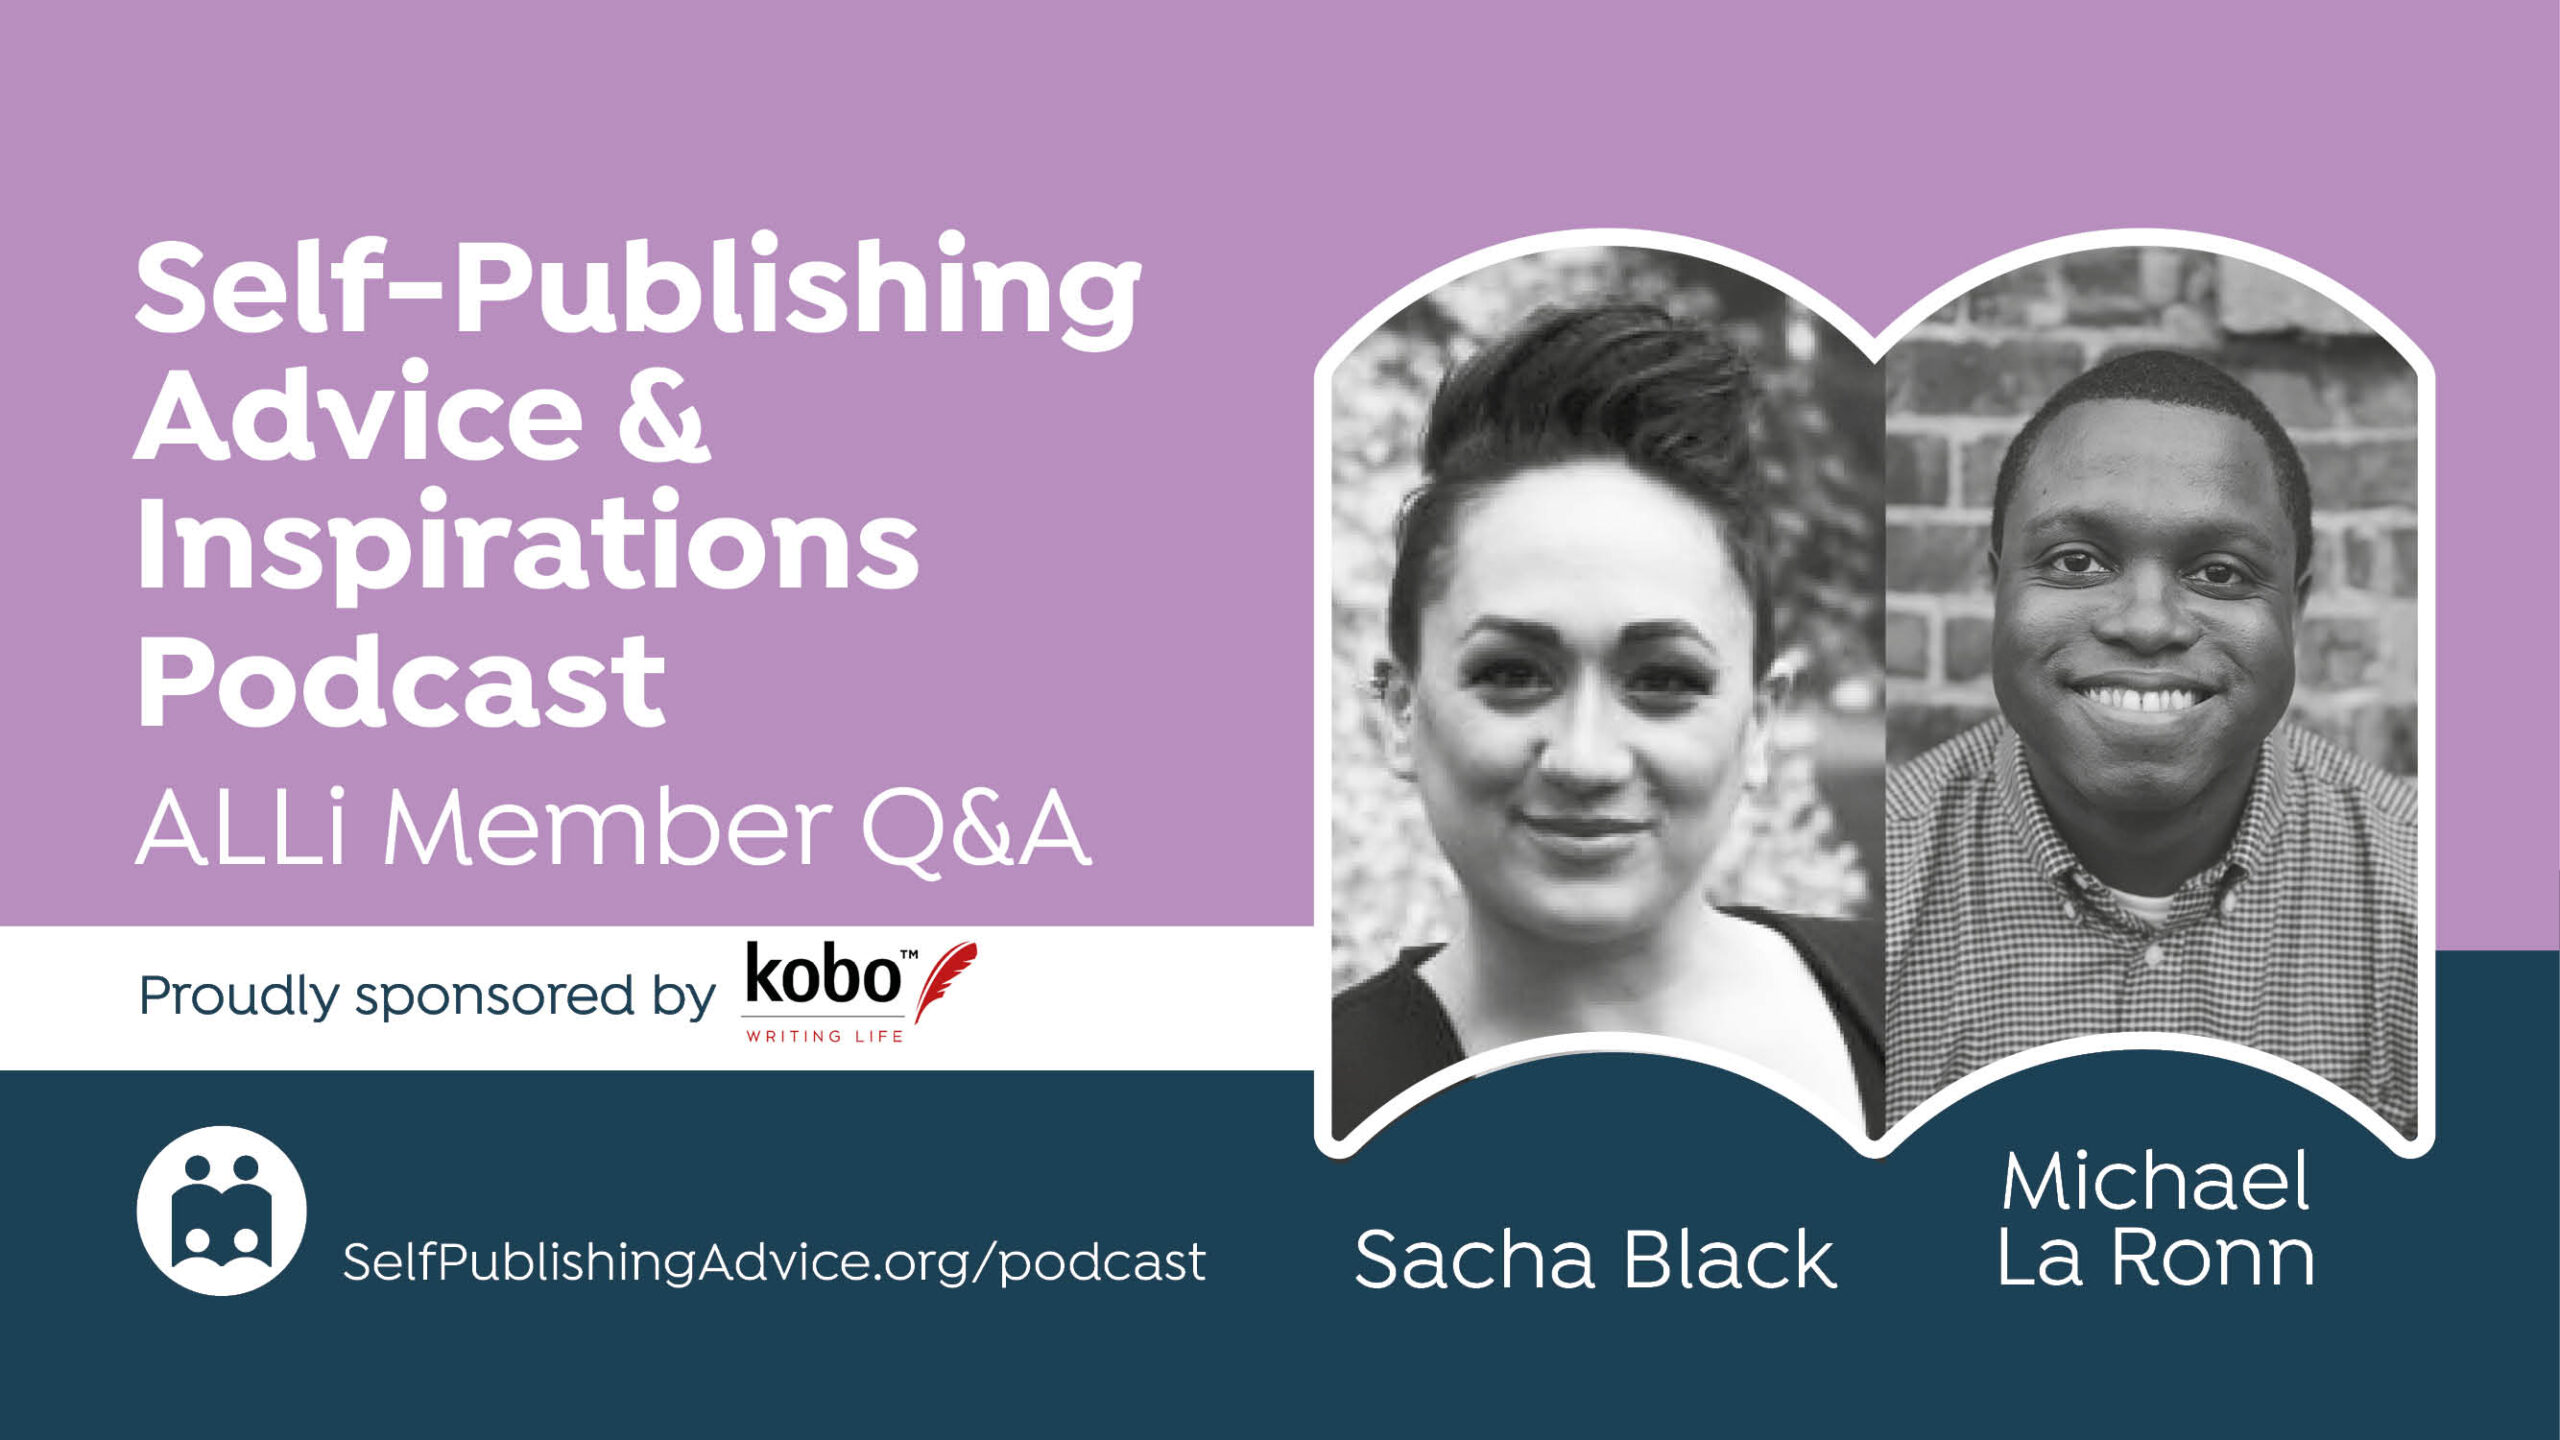 Publishing On Serial Platforms, Finding A Cover Designer, And More Questions Answered By Michael La Ronn And Sacha Black In Our Member Q&A Podcast